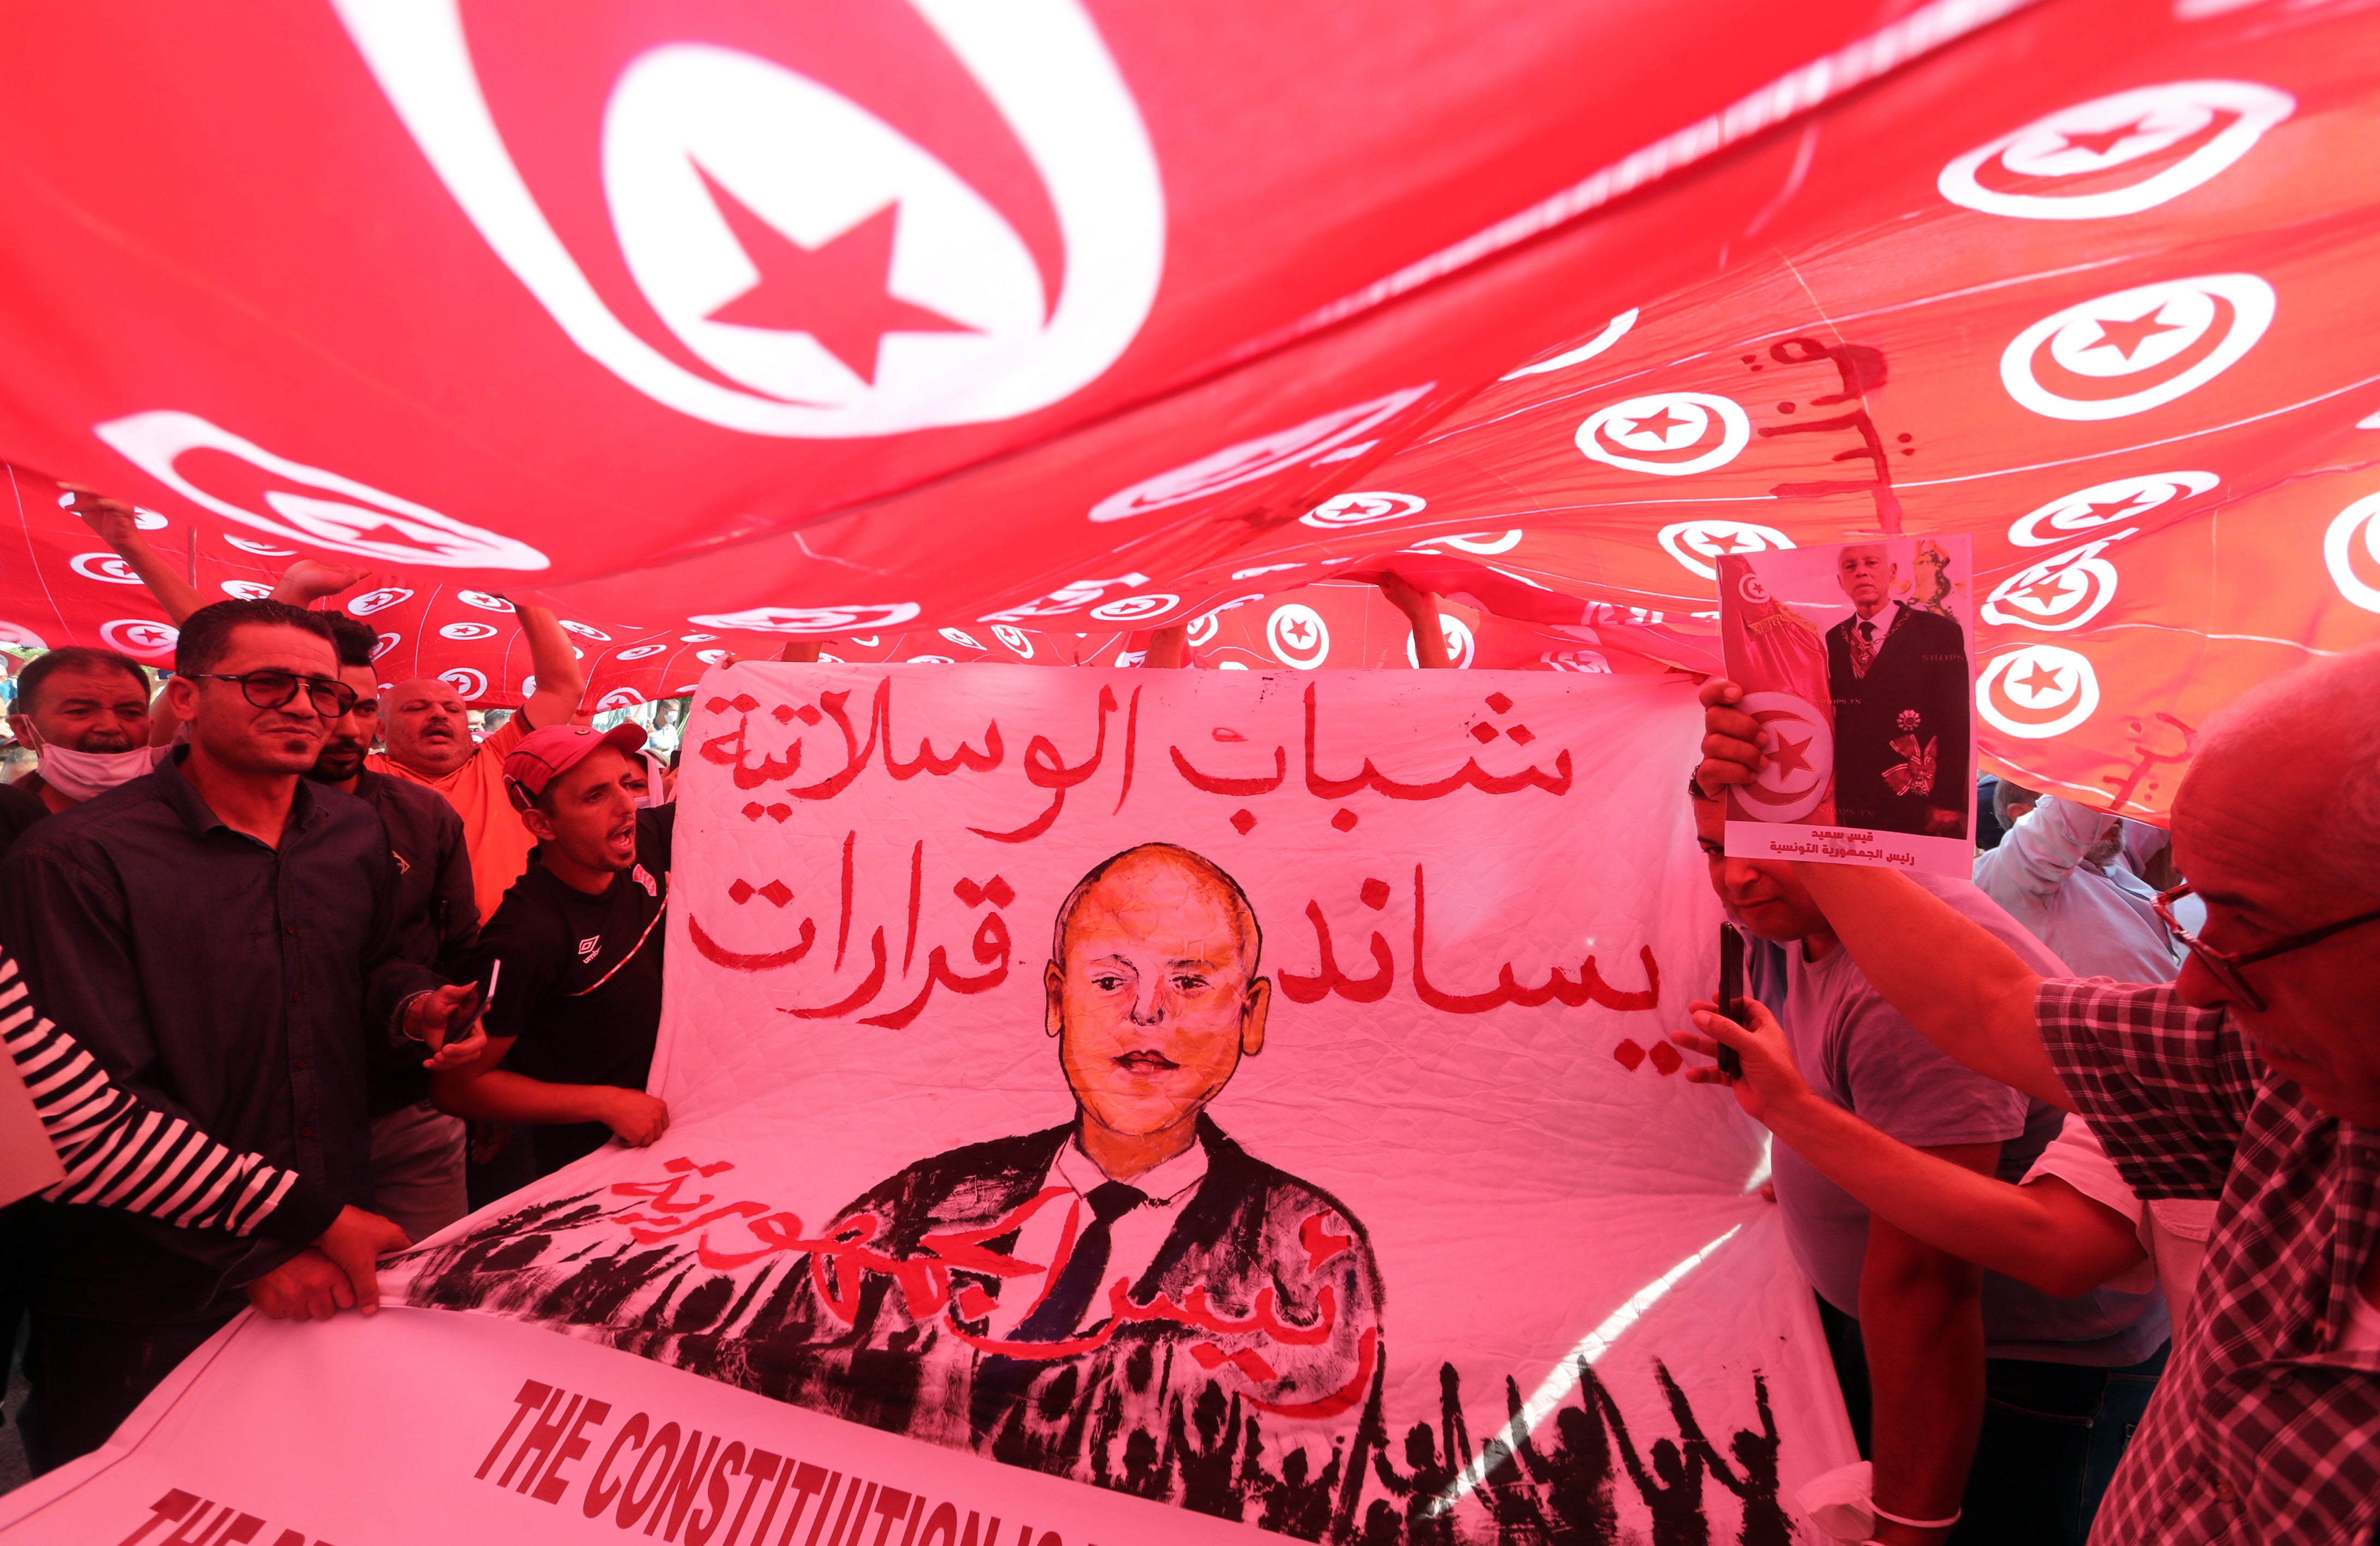 Supporters of Tunisian president Kais Saied rally in support of his seizure of power and suspension of parliament in Tunis, 3 October 2021